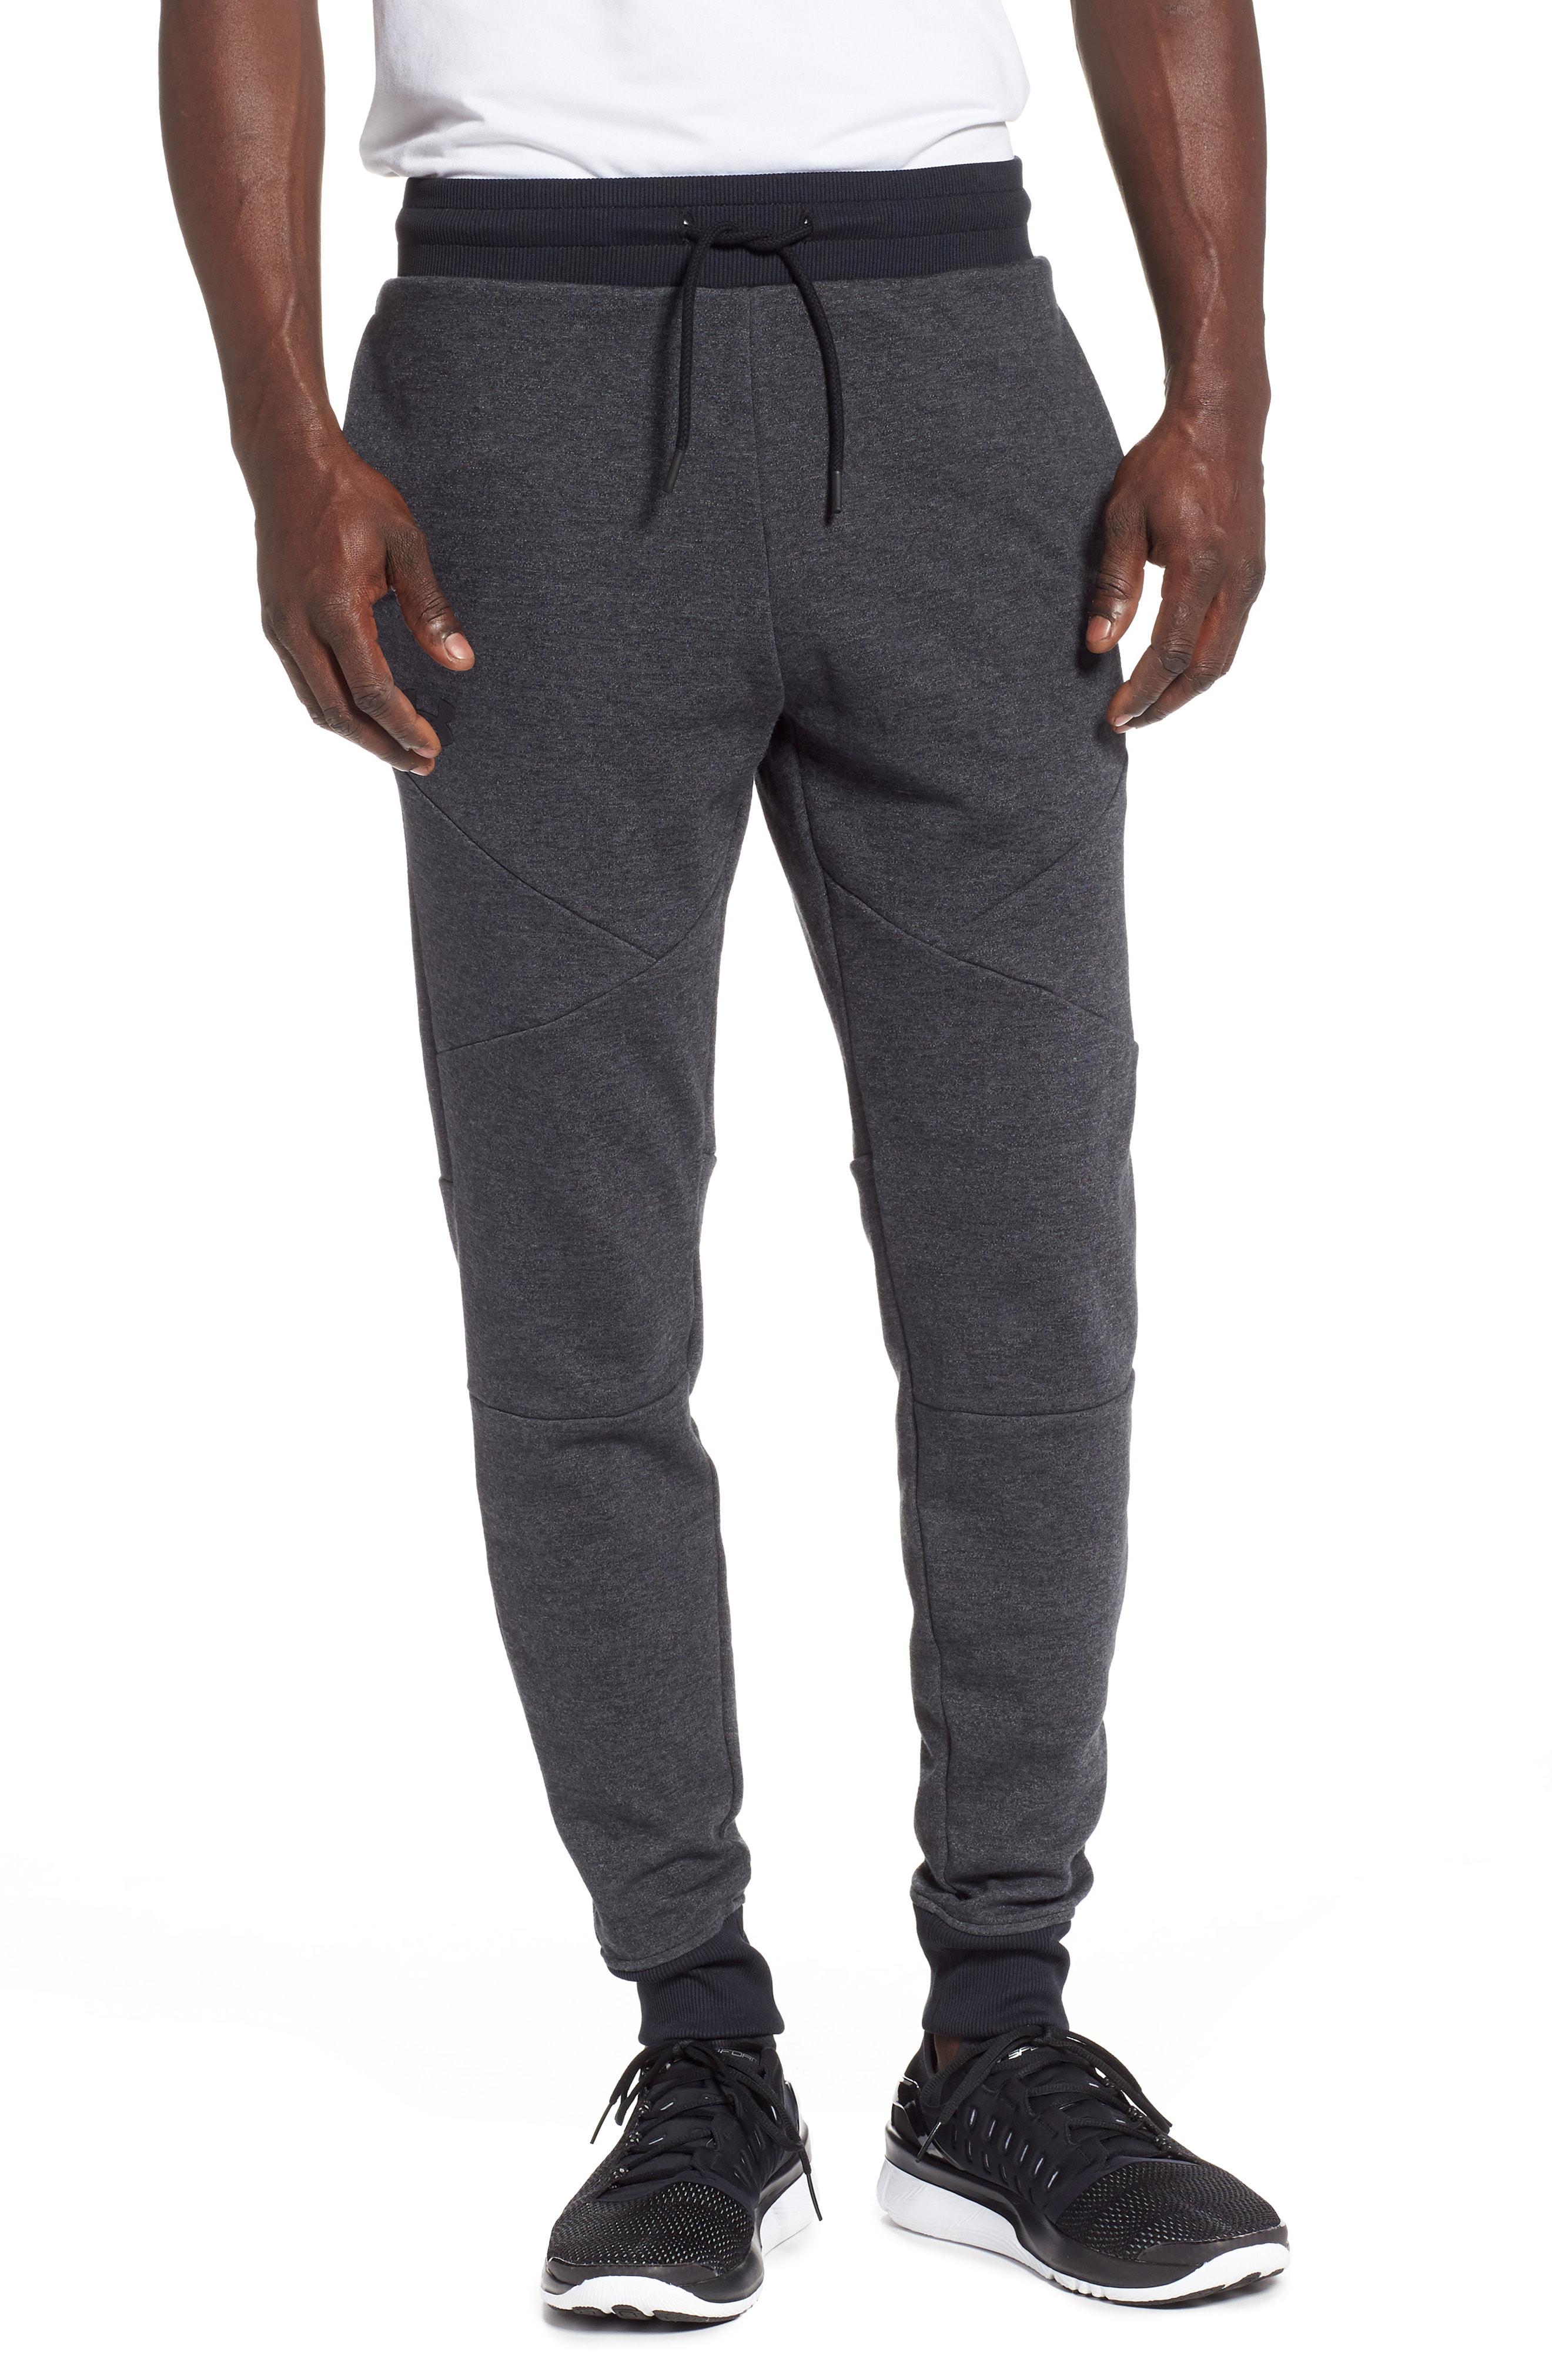 Under Armour Unstoppable Double Knit Jogger Pants in Black for Men - Lyst